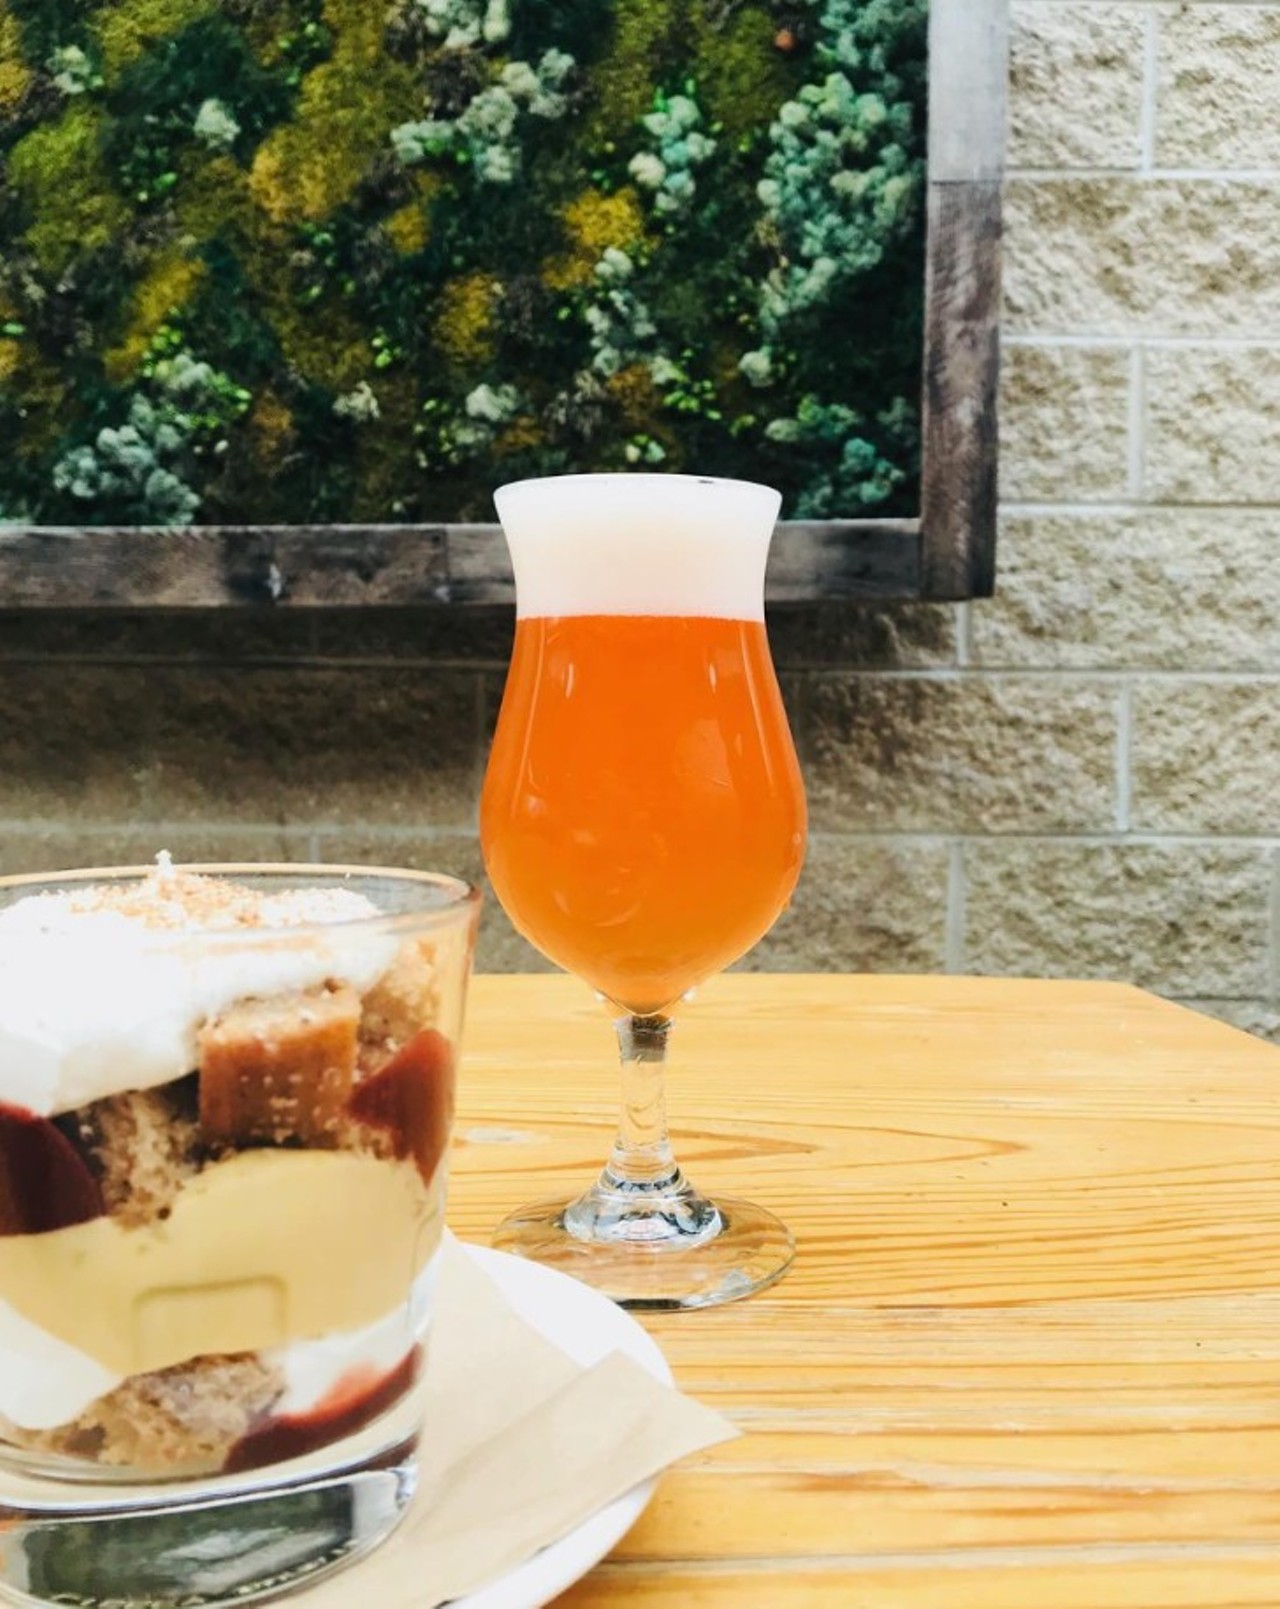 Brewery Vivant&#146;s Pumpkin Tart
Grand Rapids - 7%
Not your typical pumpkin-flavored beer, Brewery Vivant&#146;s Pumpkin Tart gives a sour spin to one of the season&#146;s most popular flavors.
Photo courtesy of @breweryvivant